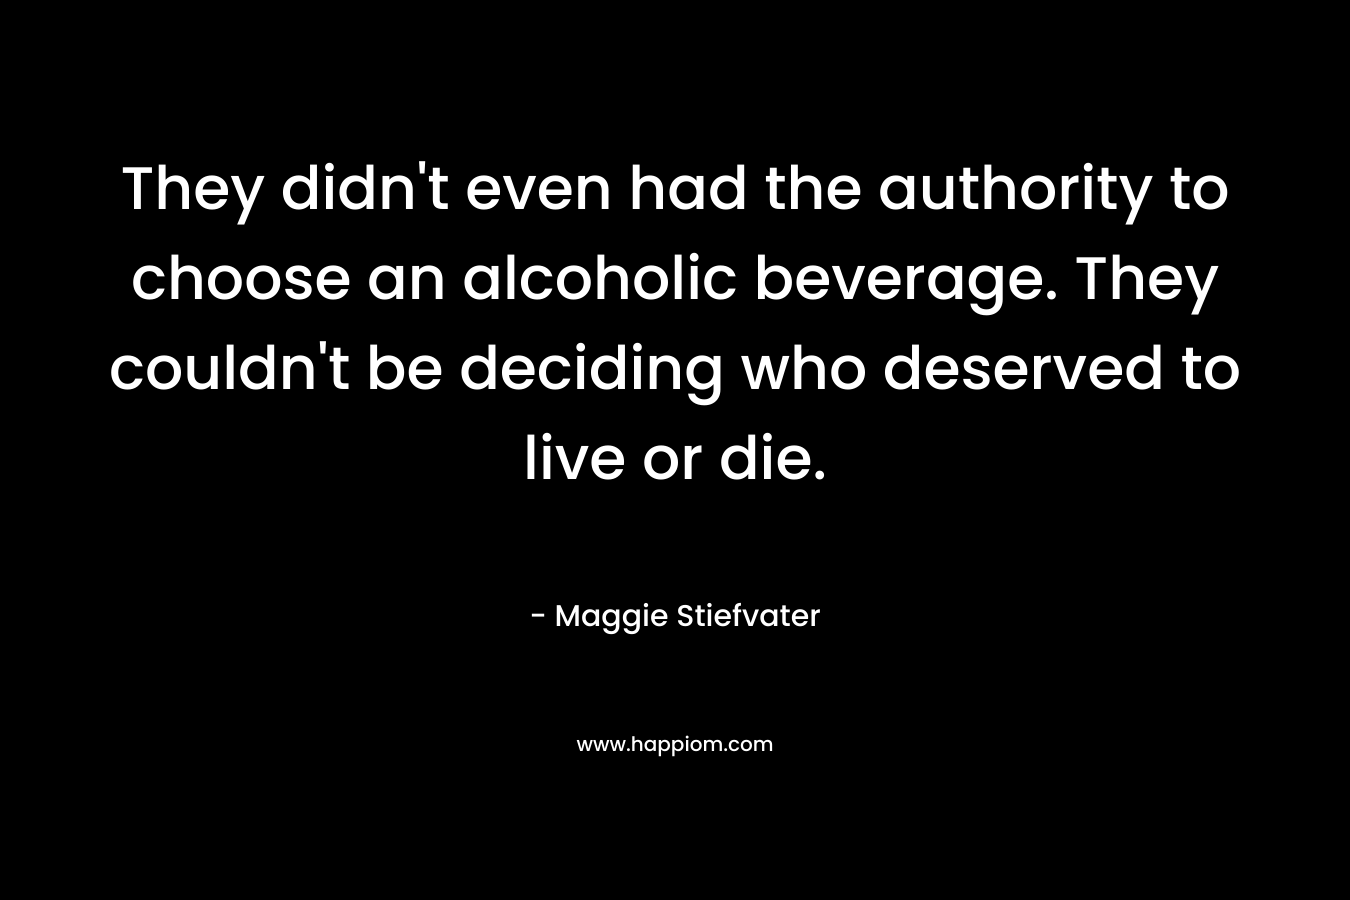 They didn’t even had the authority to choose an alcoholic beverage. They couldn’t be deciding who deserved to live or die. – Maggie Stiefvater